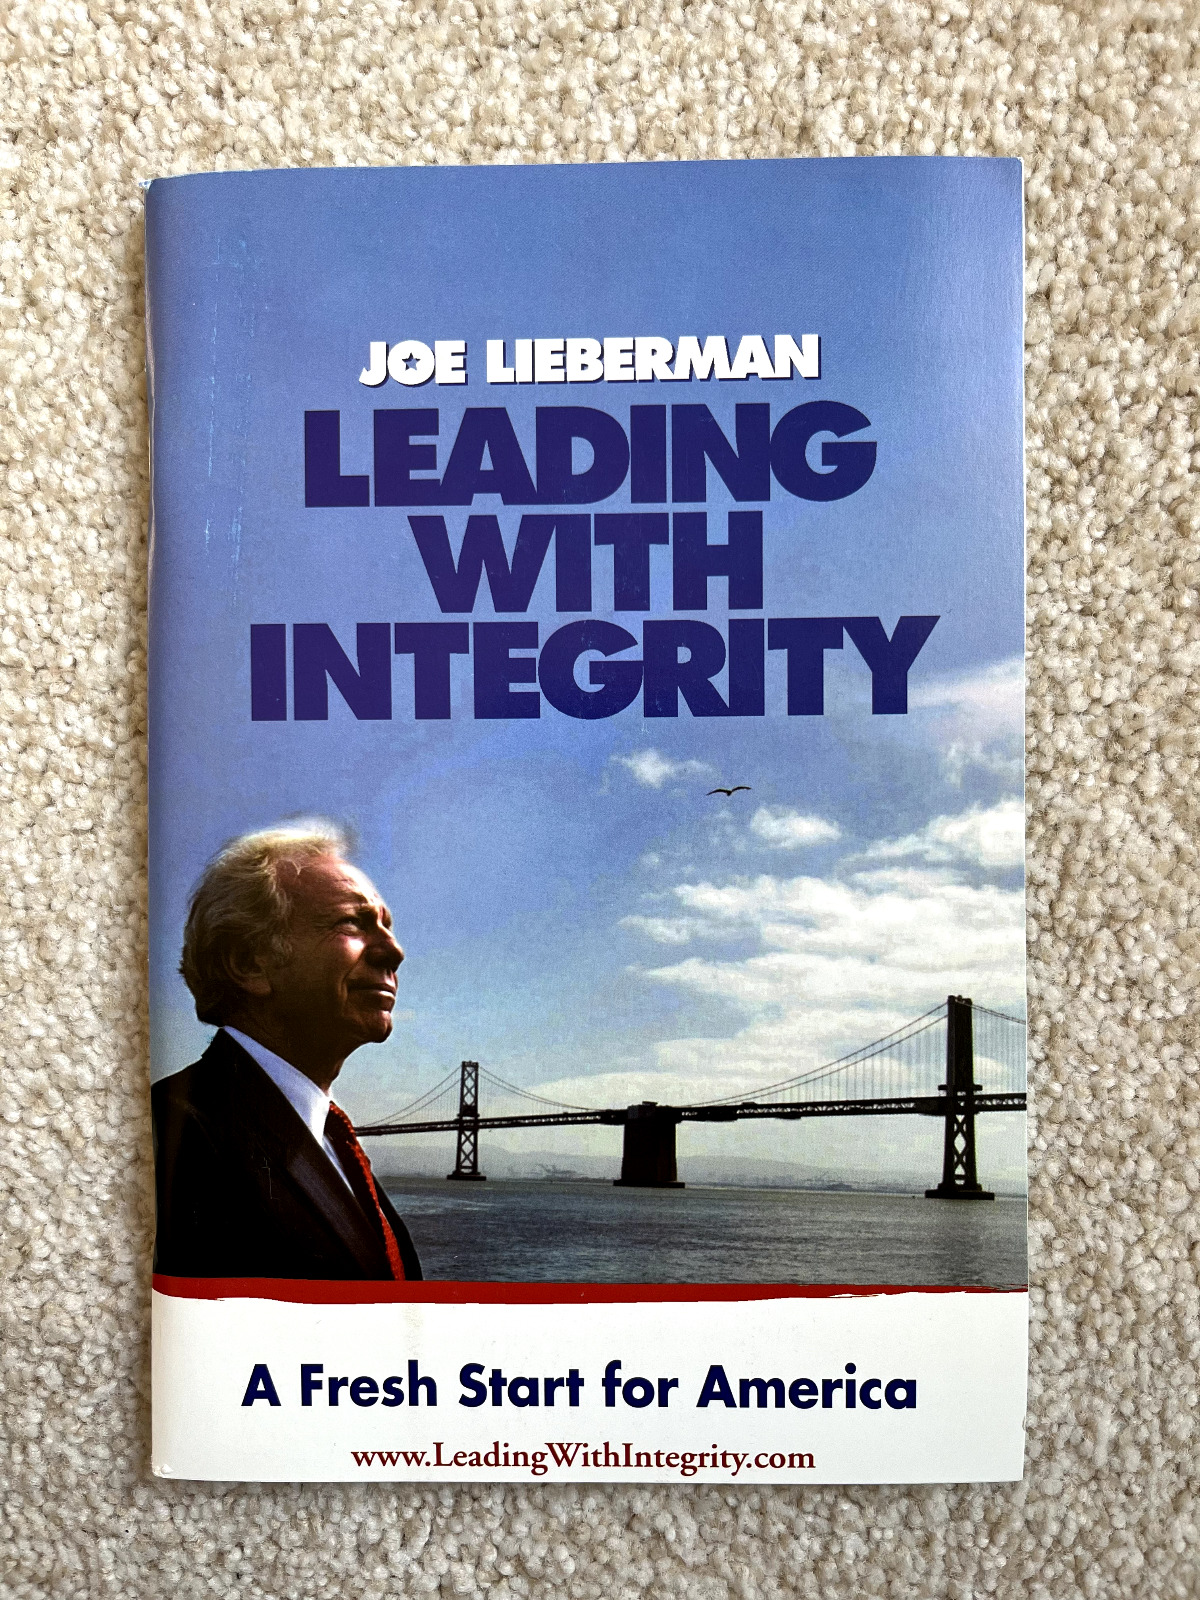 Joe Lieberman 2004 Presidential Campaign Booklet from New Hampshire Primary